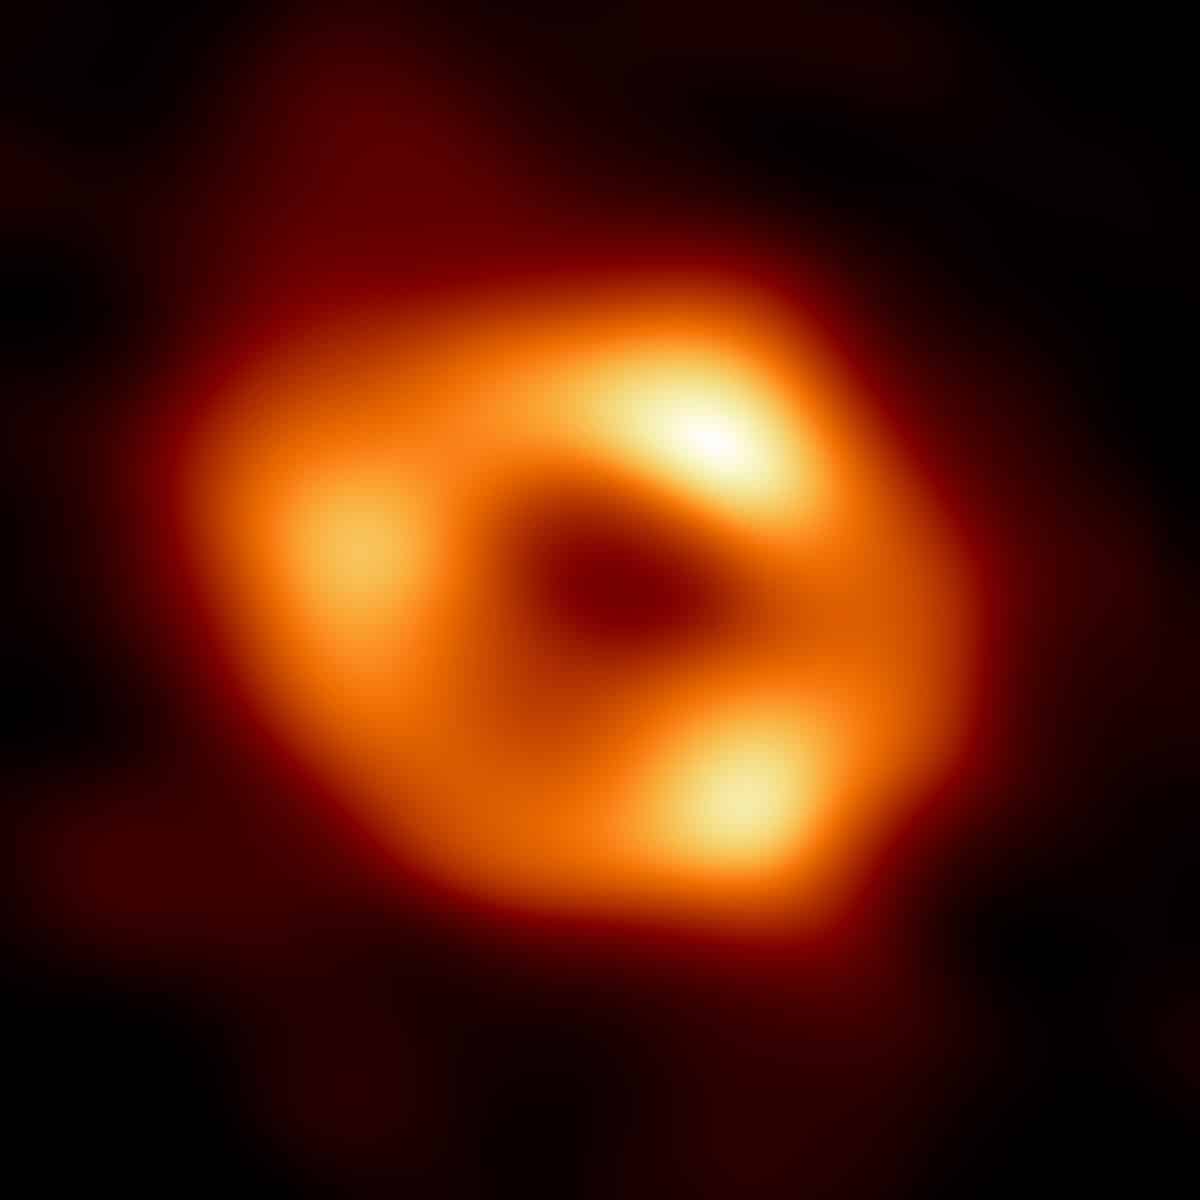 Black Hole in the Milky Way